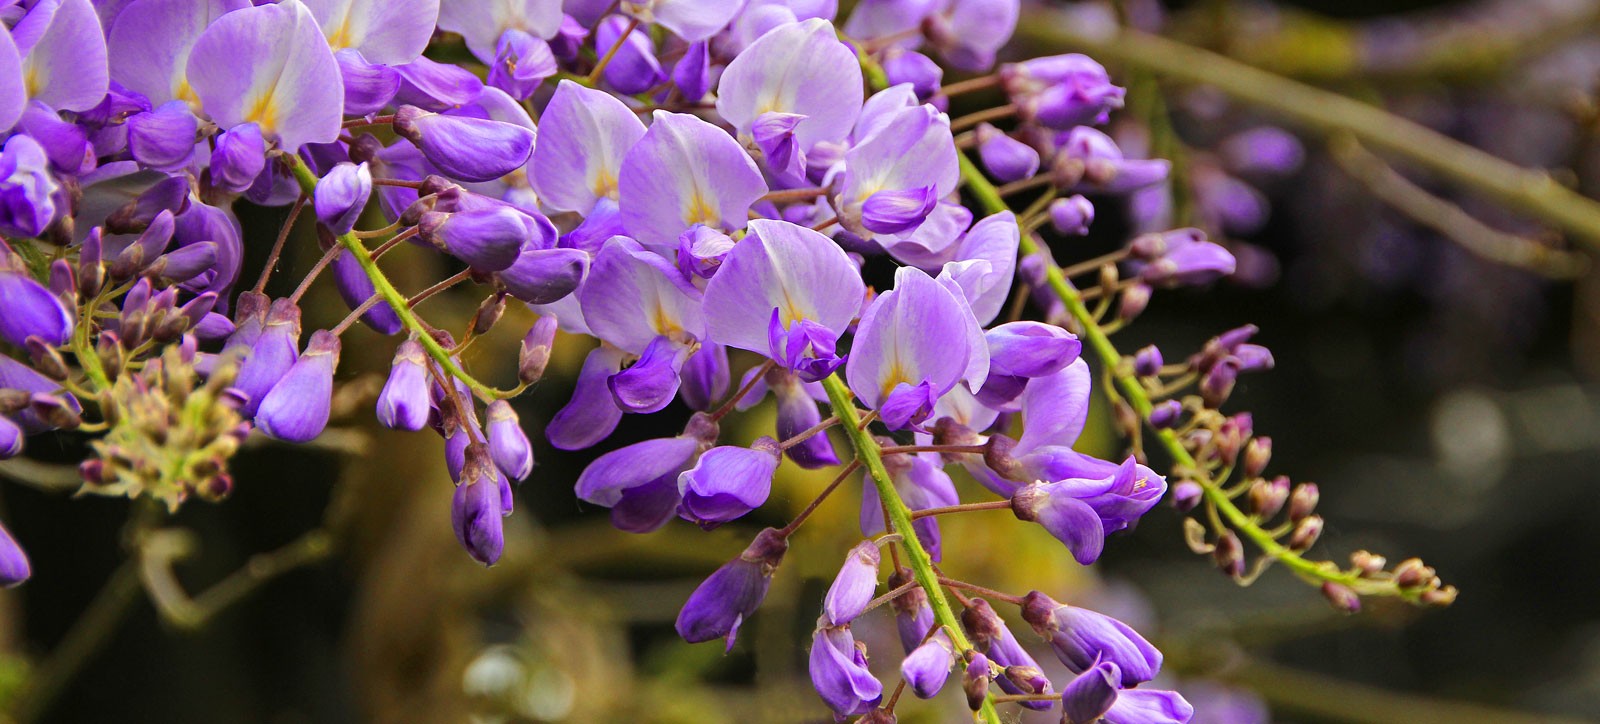 Wisteria Meaning